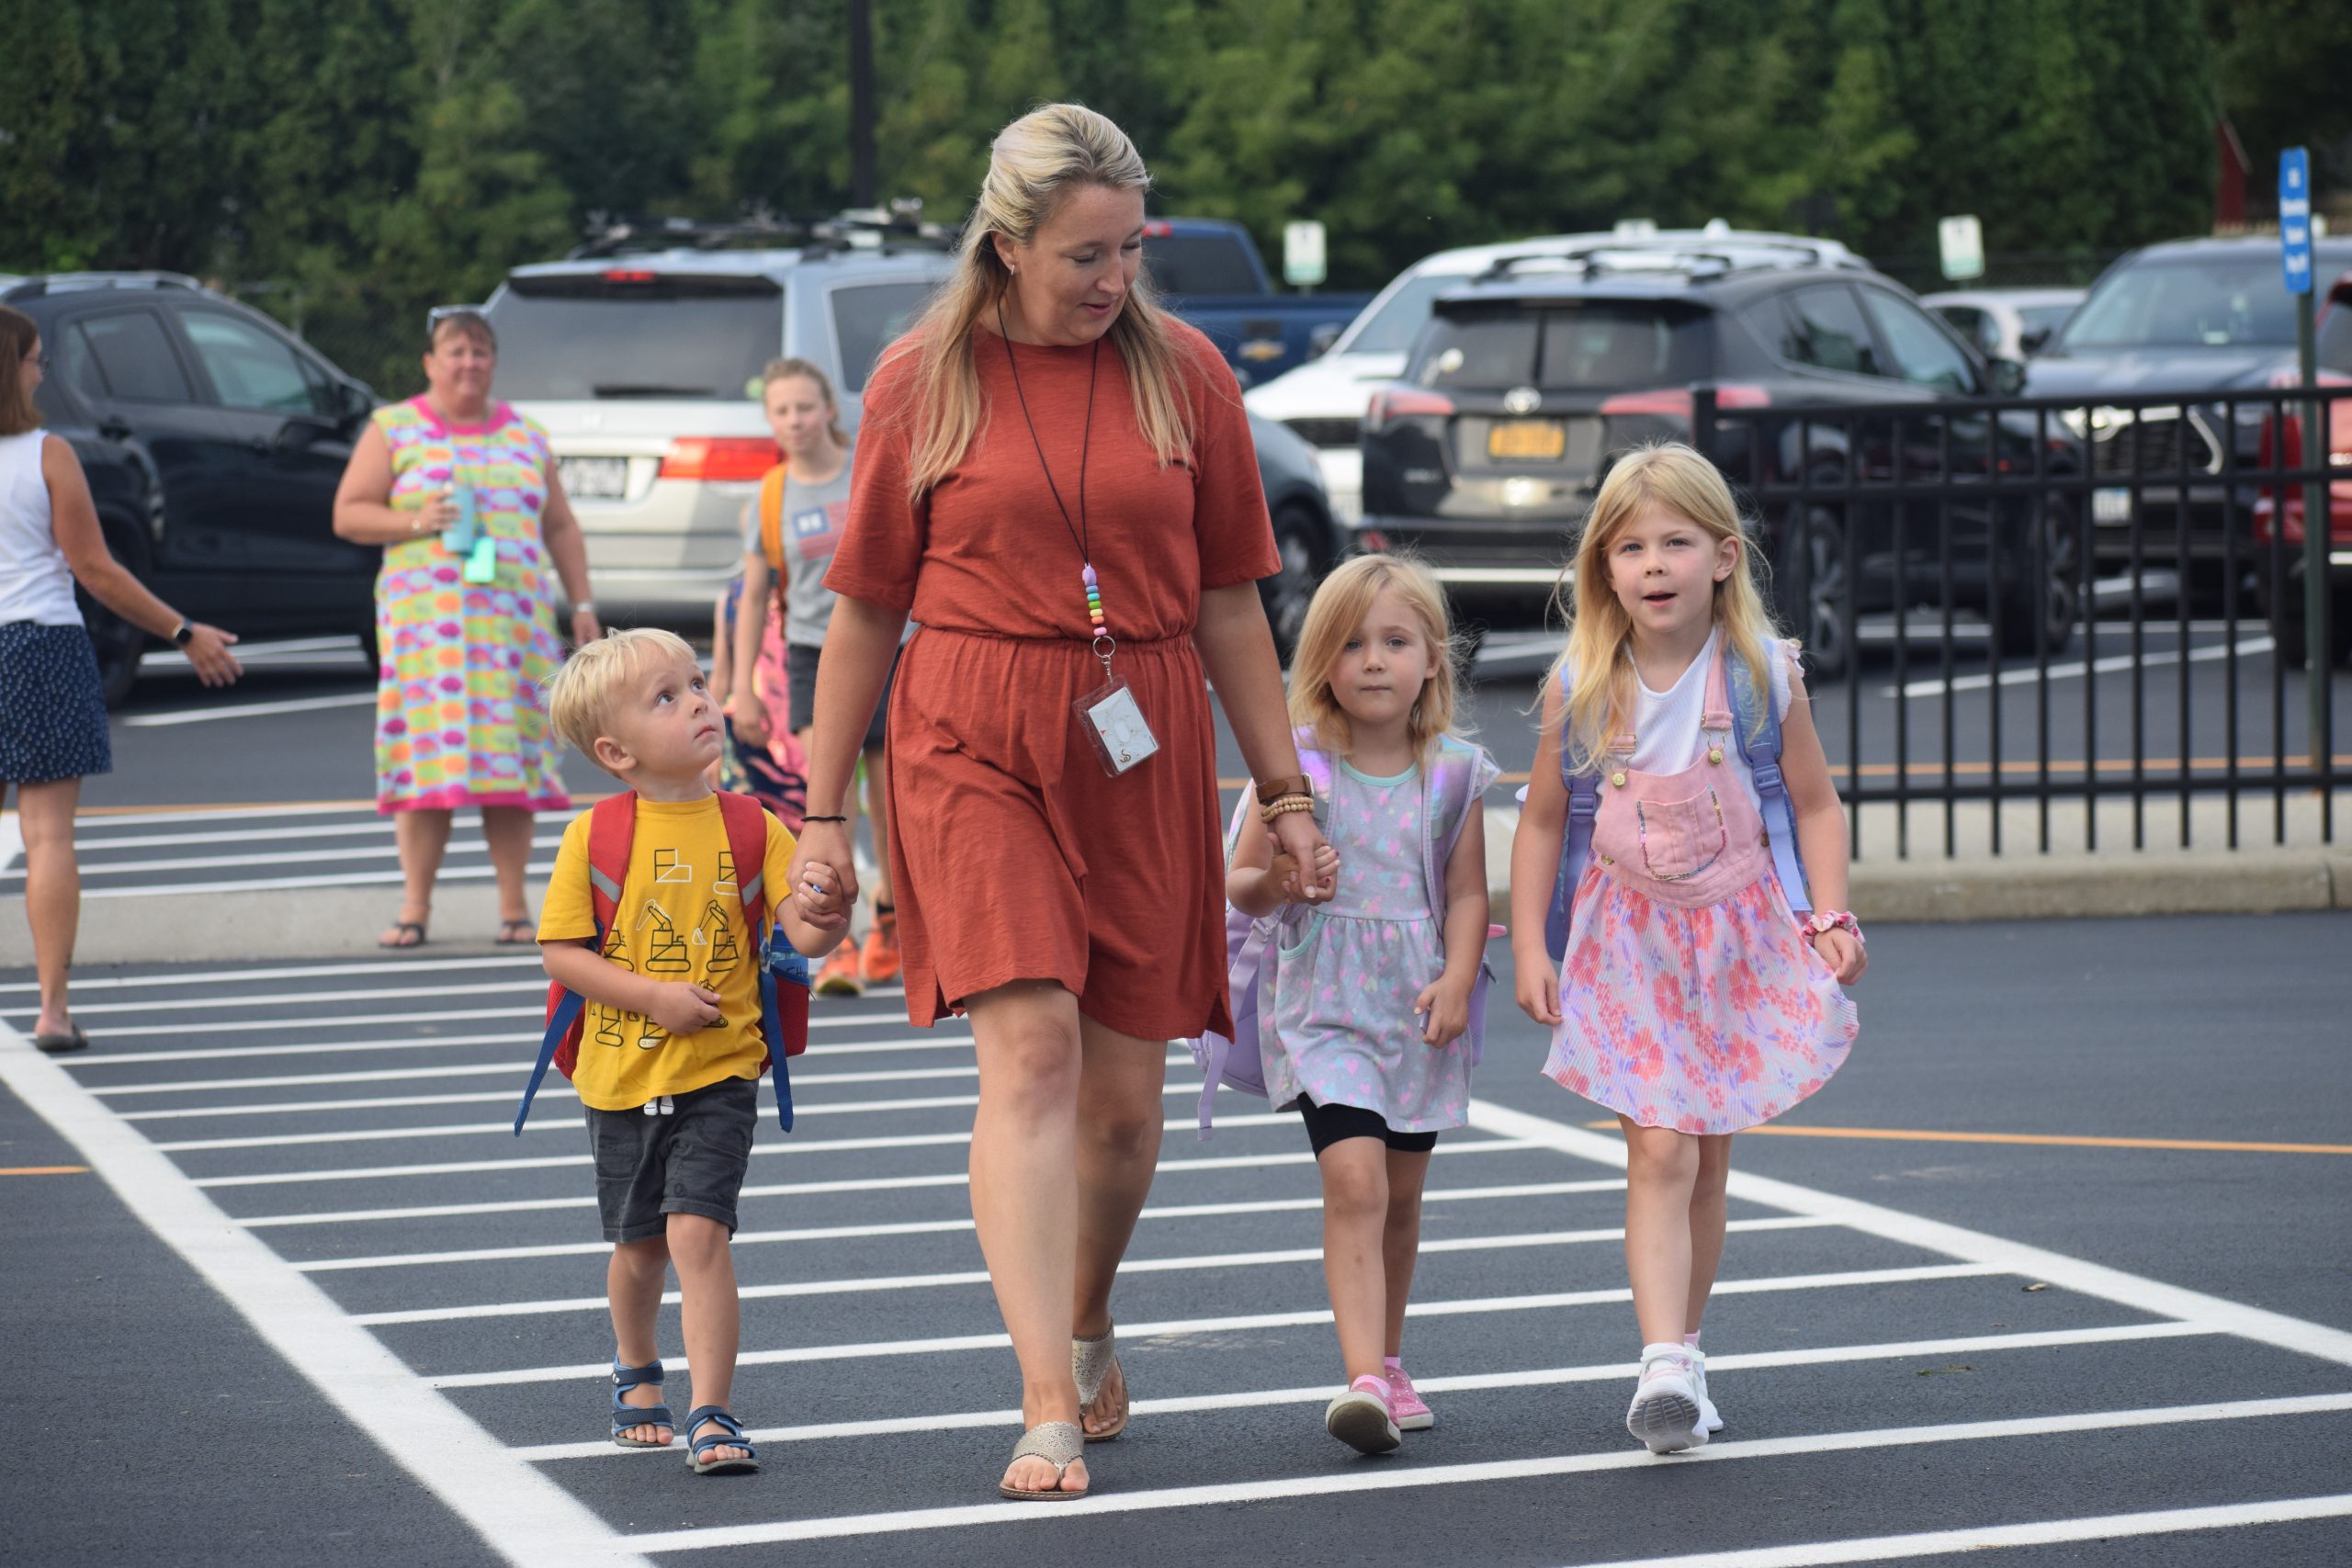 A staff member helps students cross a parking lot